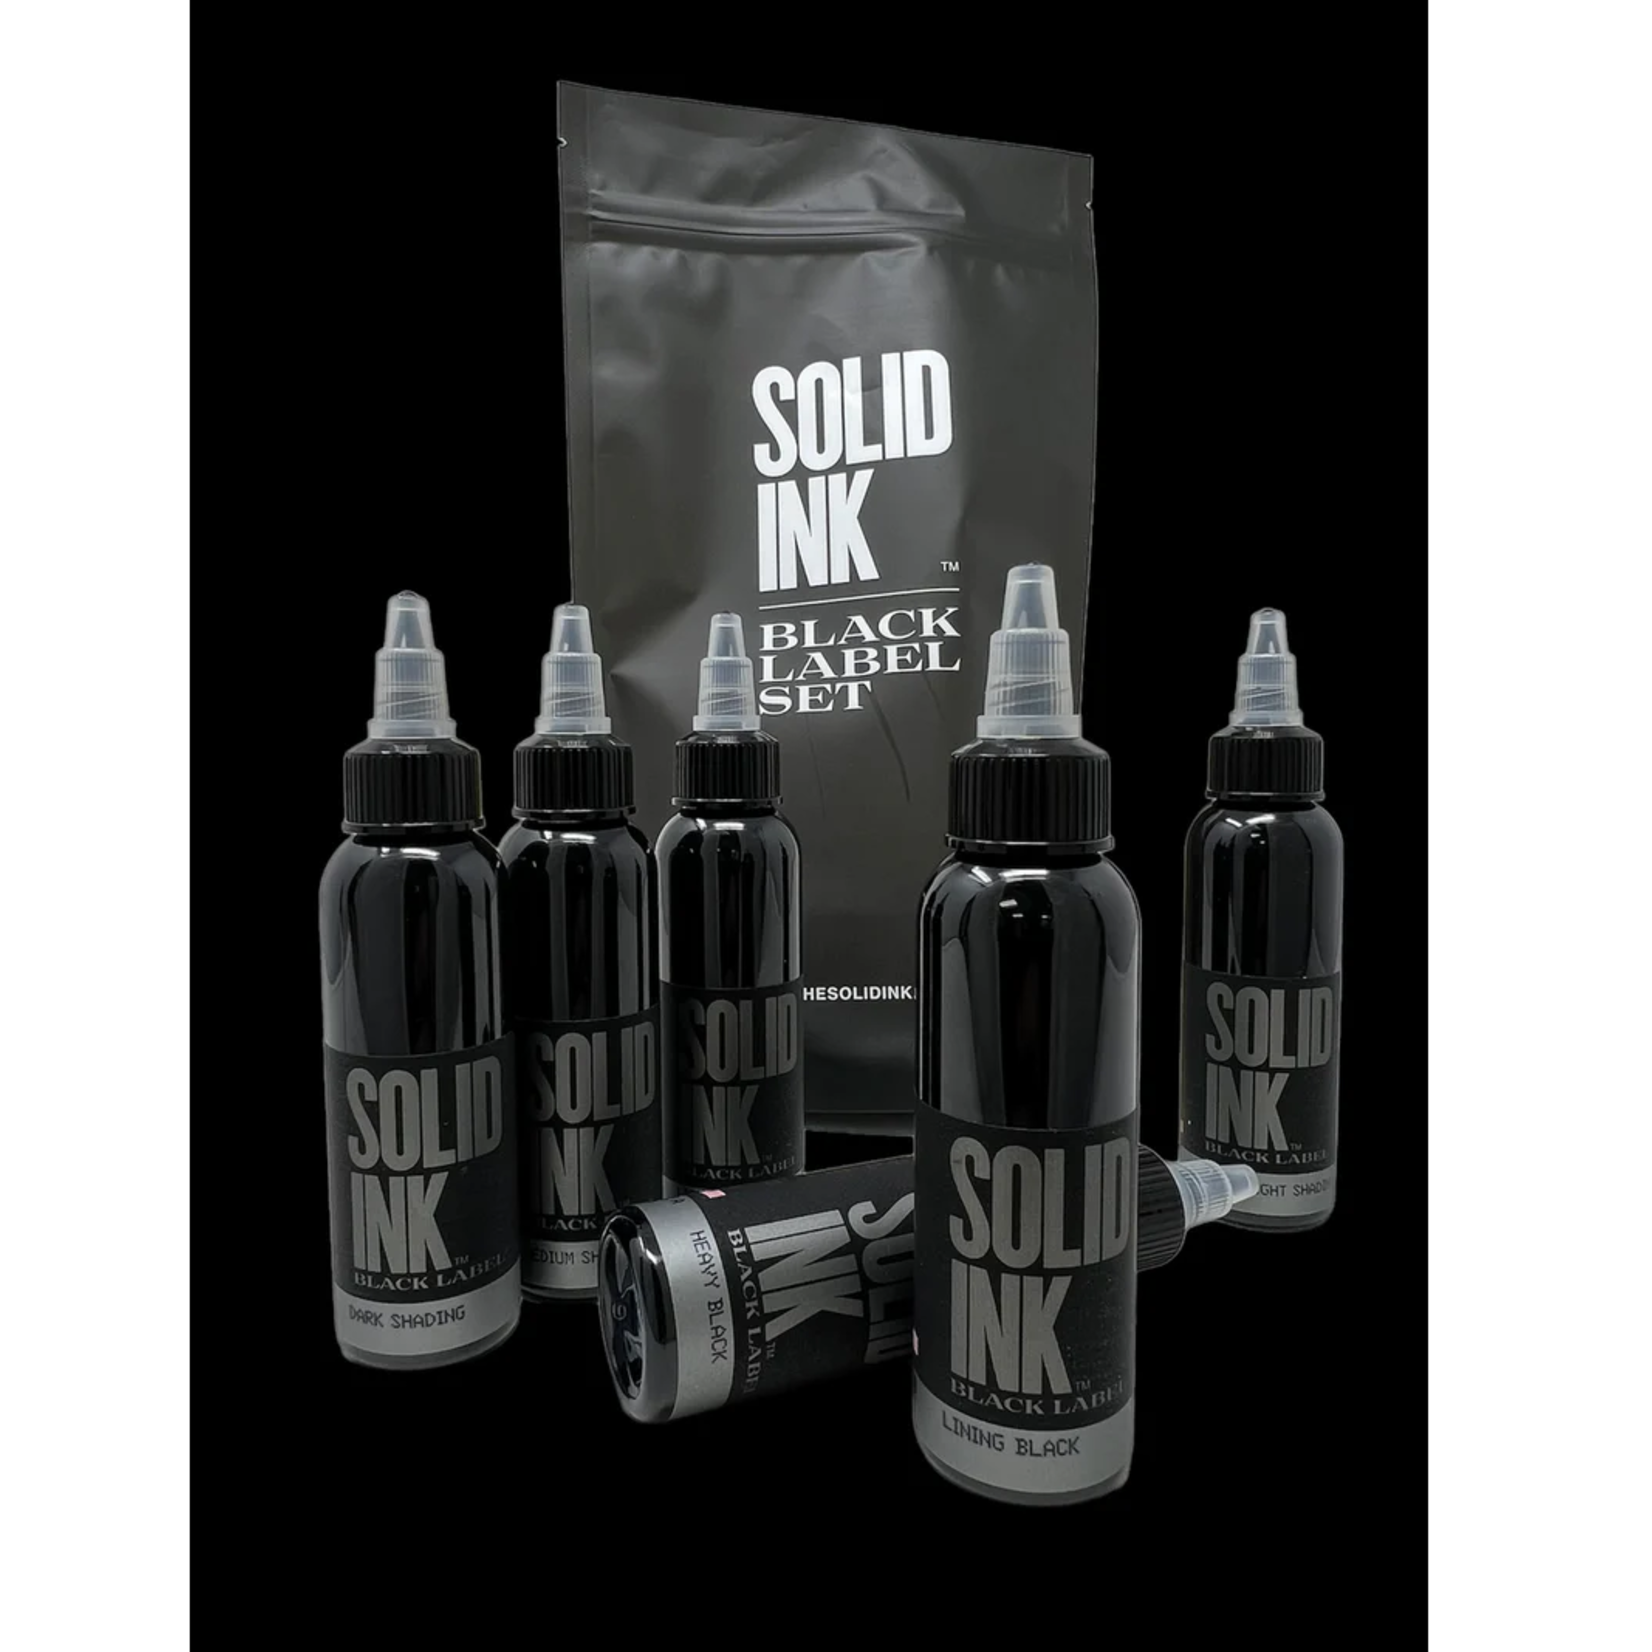 SOLID INK GREY WASH SET 6X5 PRICE (INCLUDES LINING AND HEAVY) 4OZ